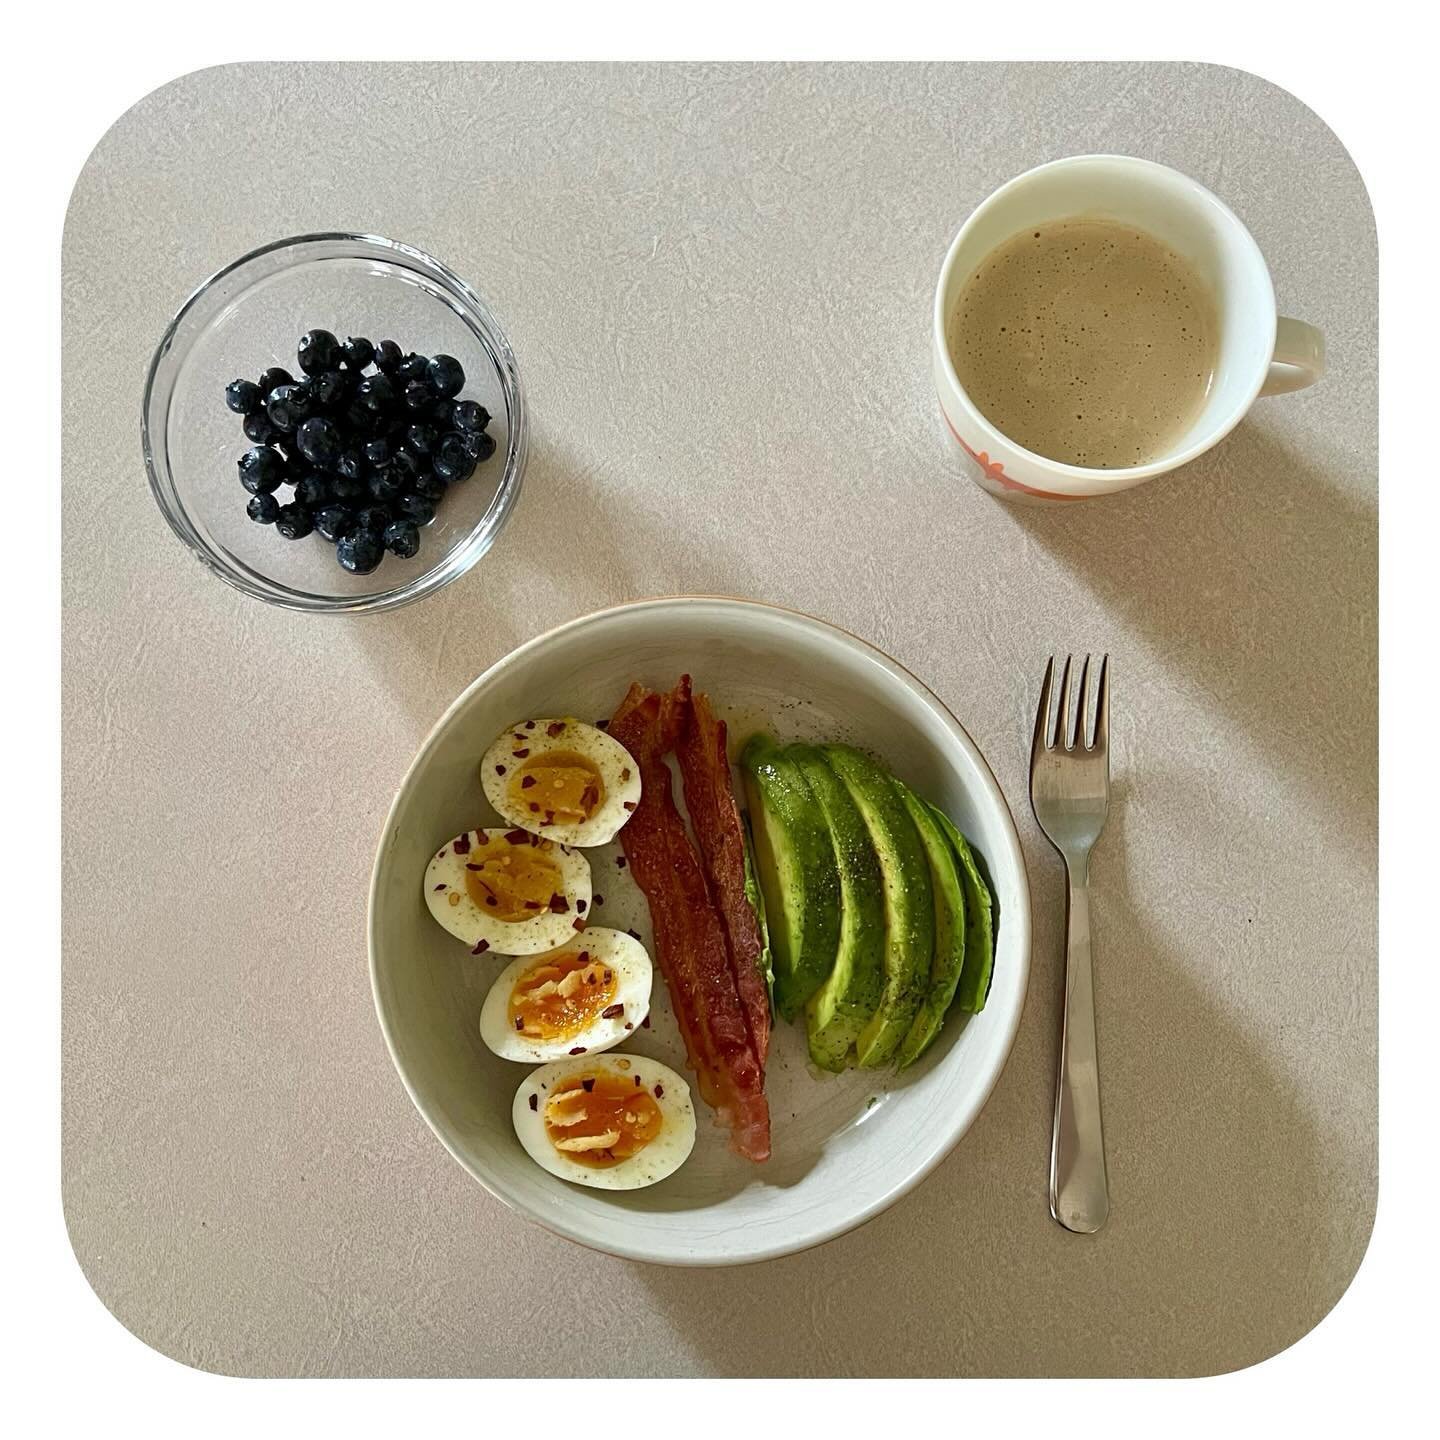 455 cals &bull; The plan was to have two boiled eggs (which I already had in the fridge) with Wasa crisp bread - a breakfast I love and have often. 

But this morning I really craved this instead:

* 1 Nespresso with 2 tbsp half&amp;half
* 1/3 cup bl